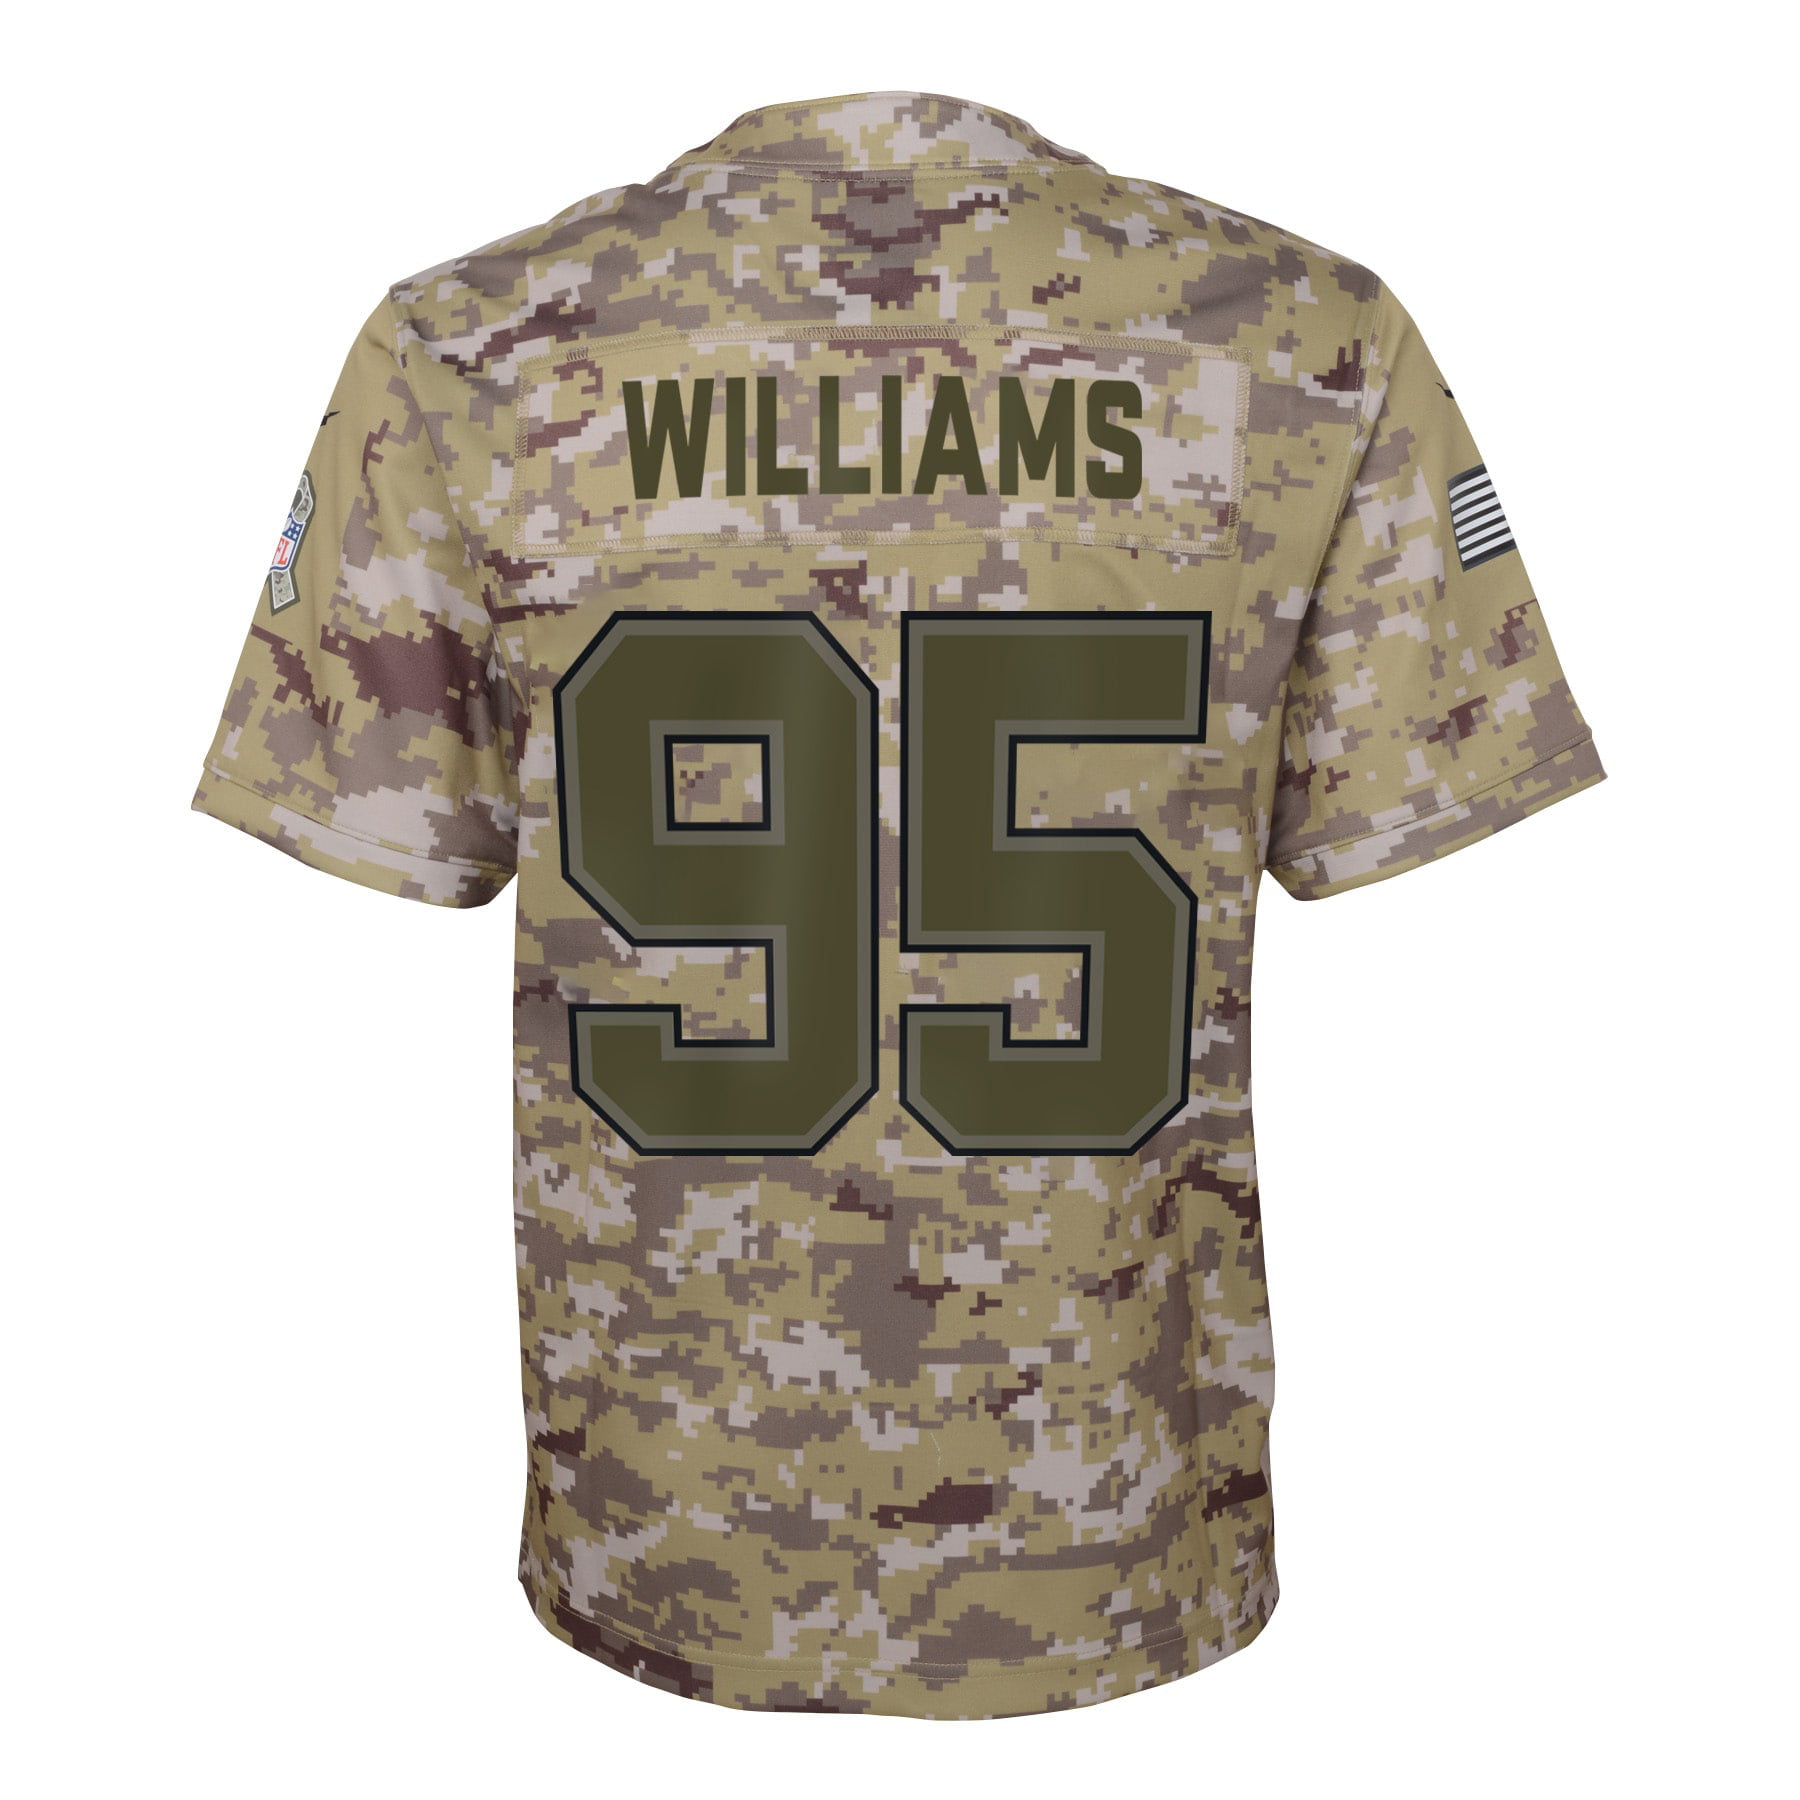 royals military jersey